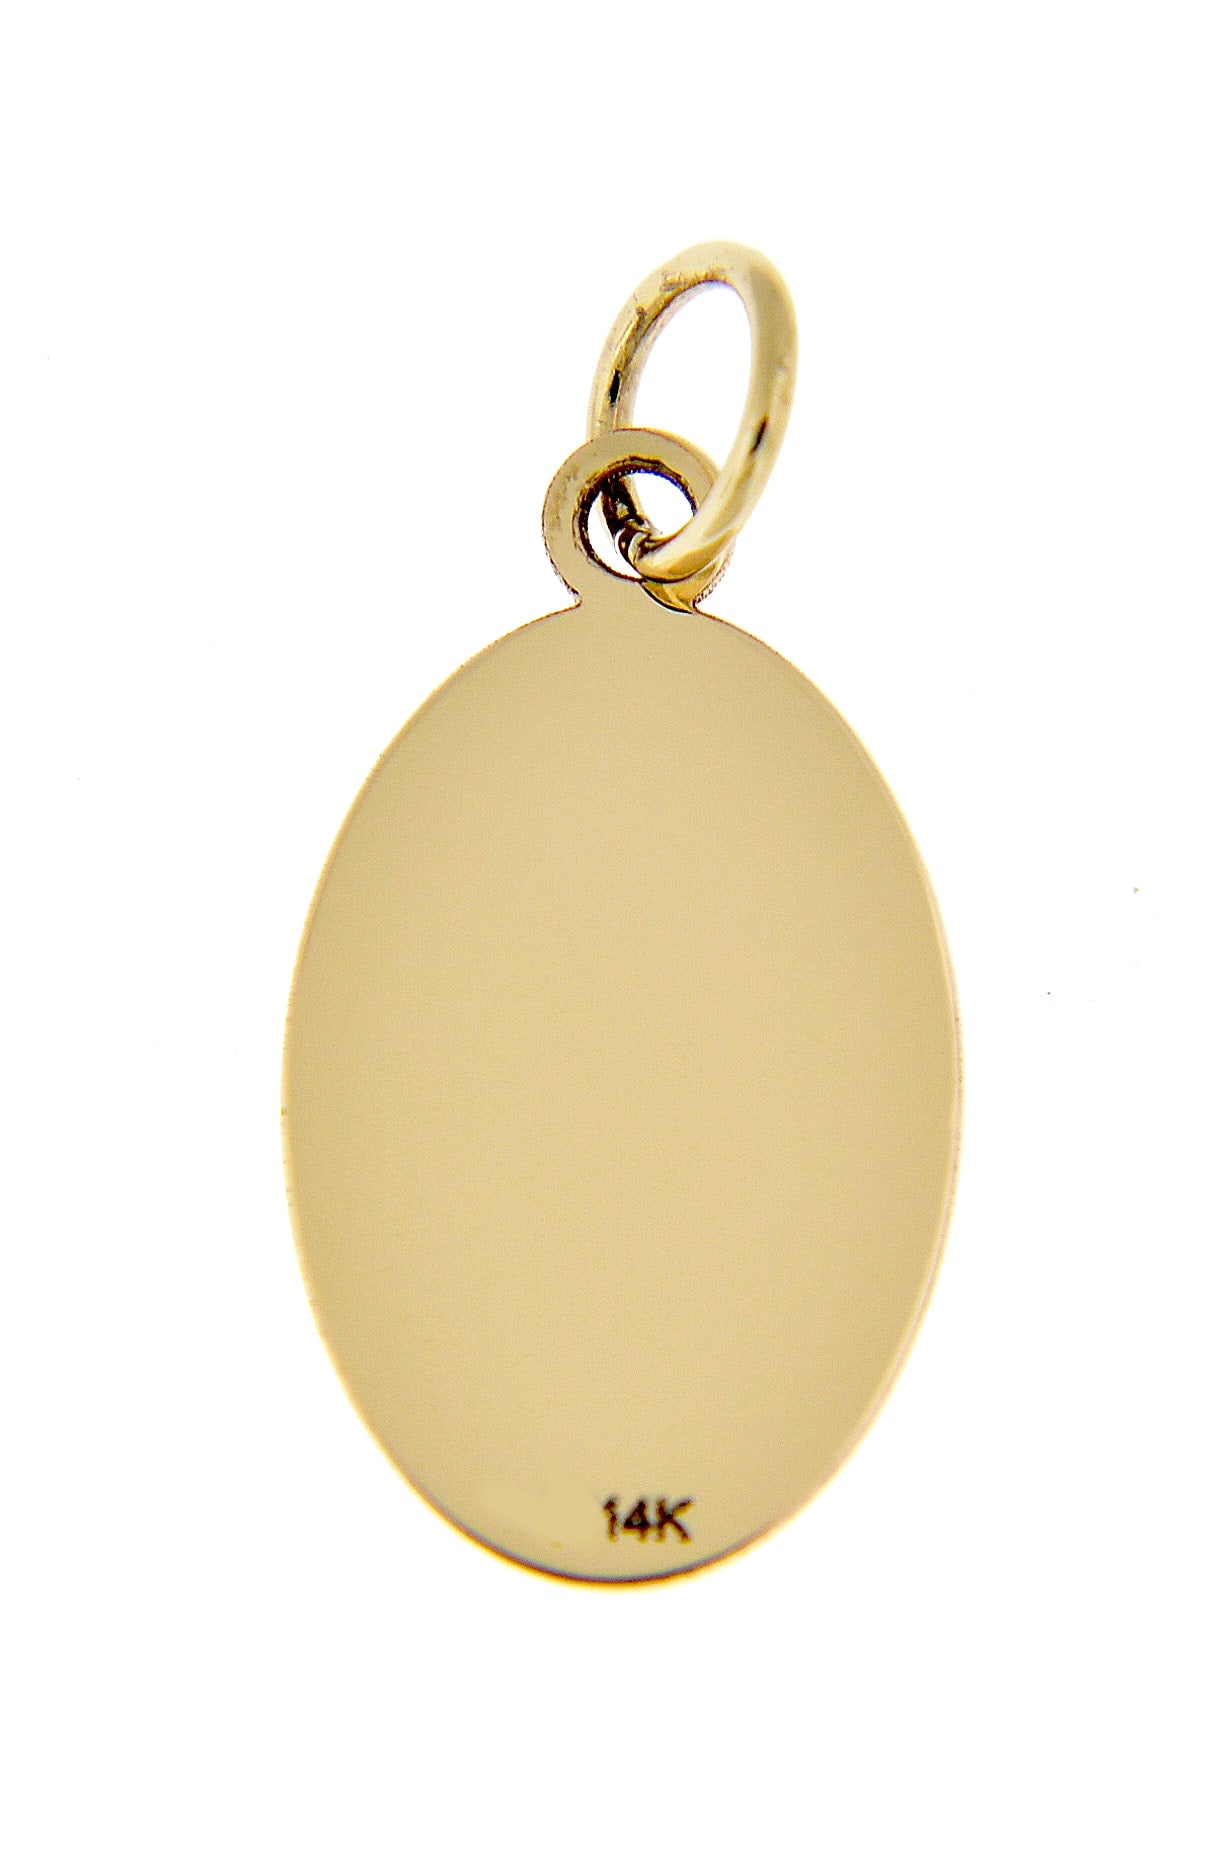 14K Yellow Gold Oval Disc Pendant Charm Personalized Engraved Initial Letter Monogram